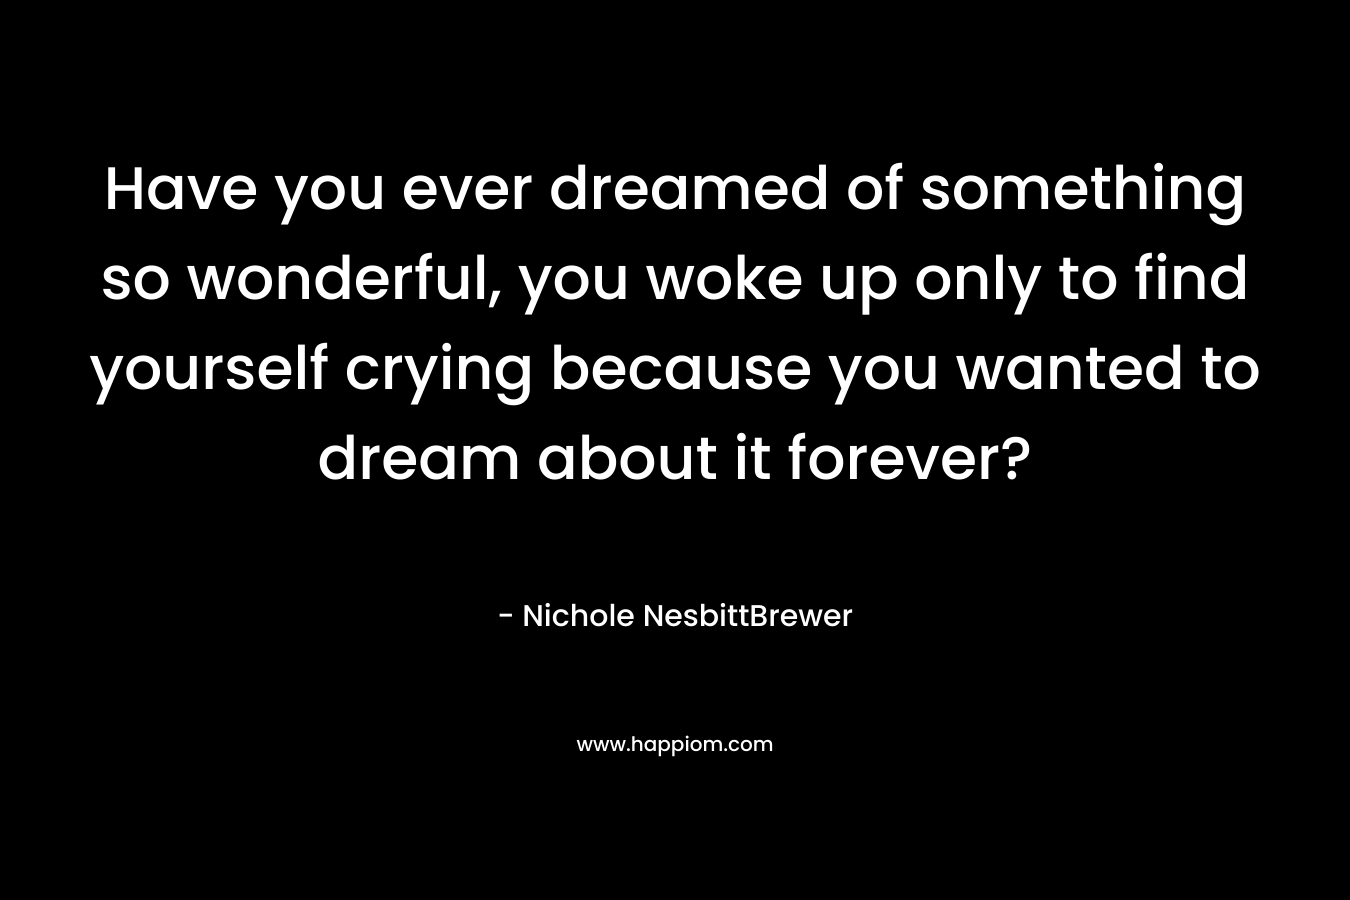 Have you ever dreamed of something so wonderful, you woke up only to find yourself crying because you wanted to dream about it forever?